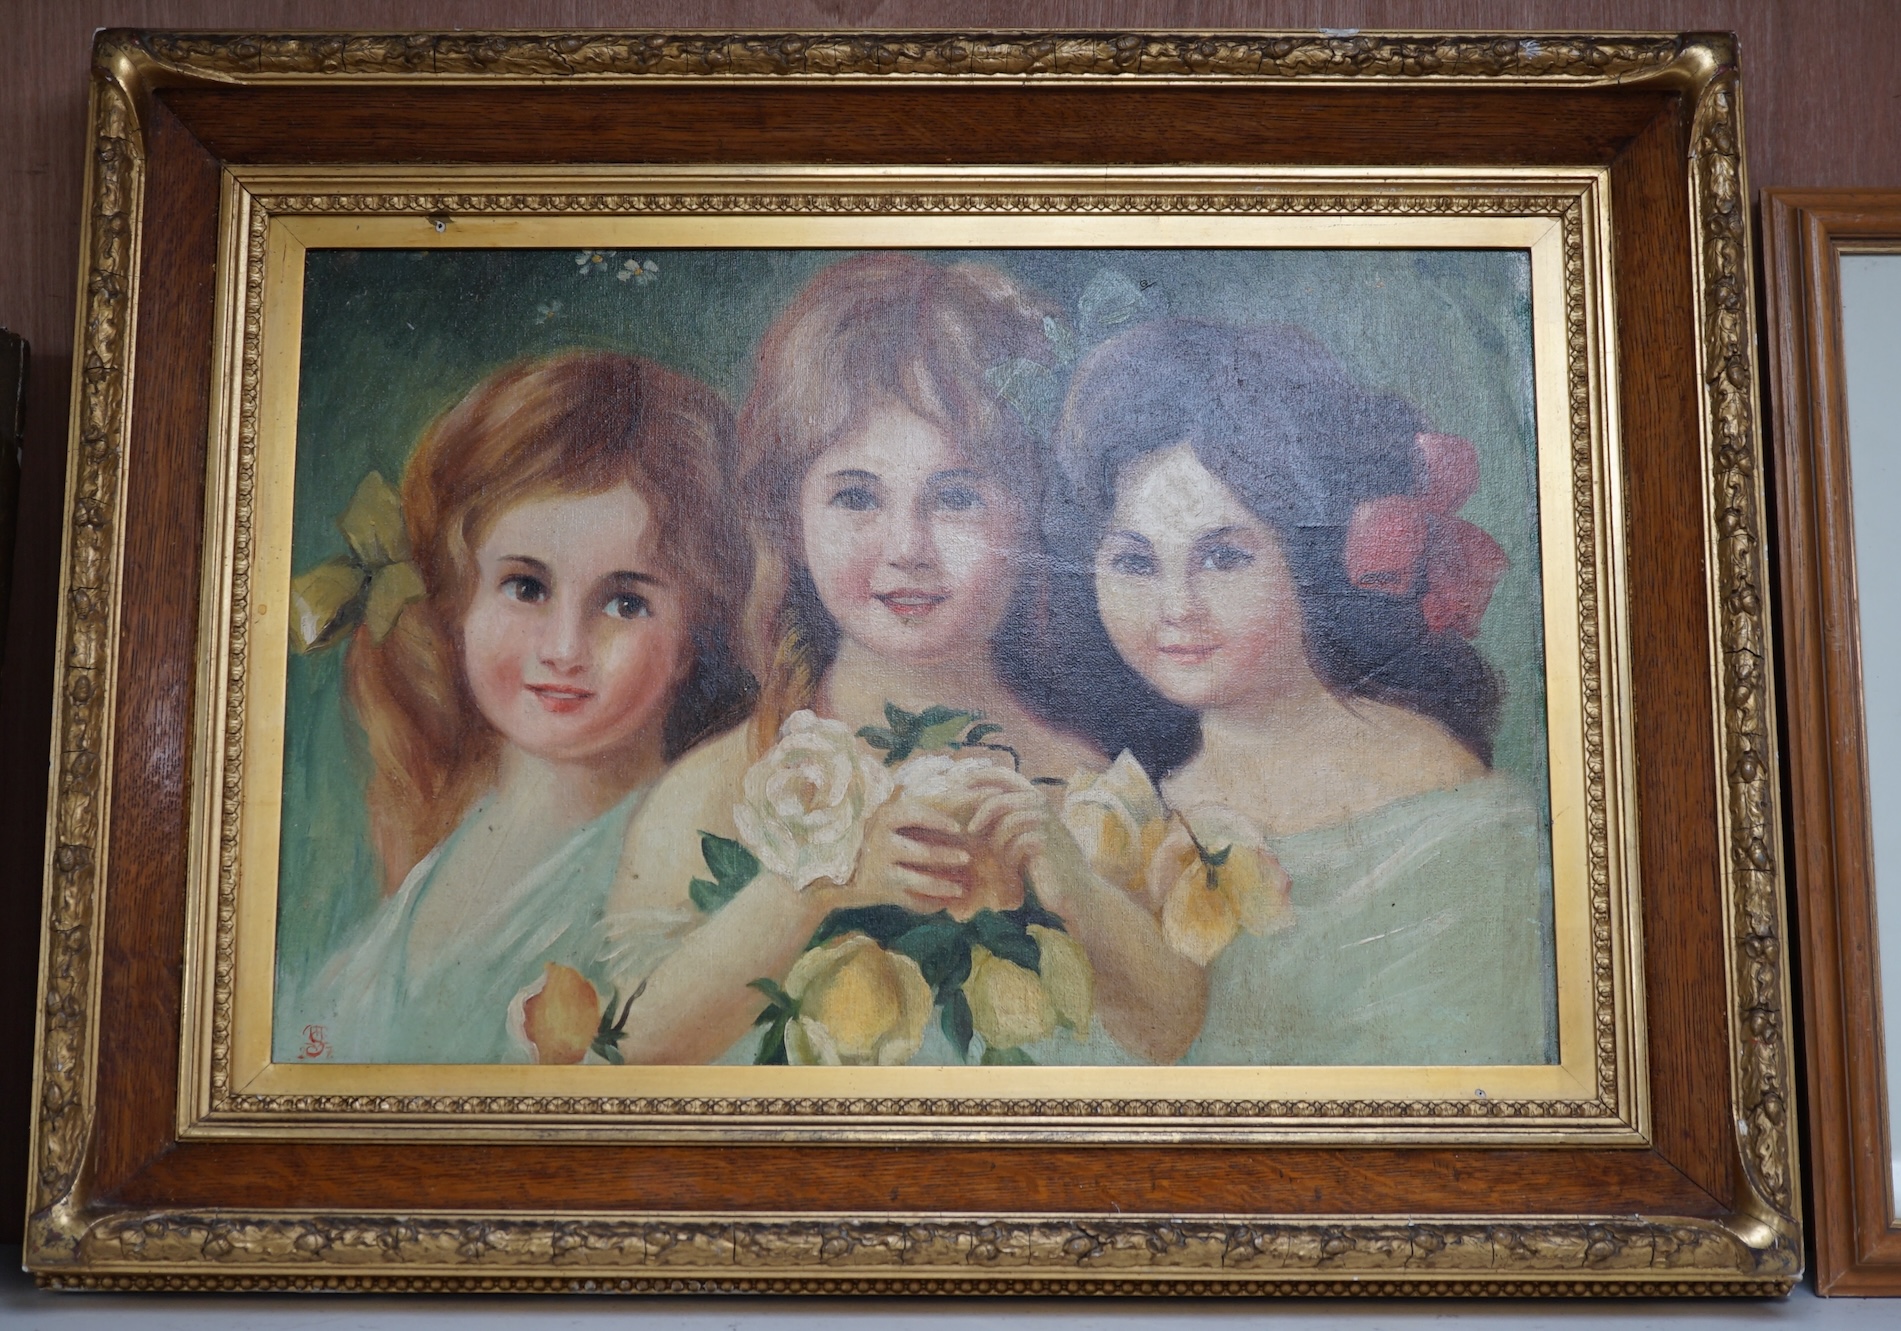 Decorative oil on board, Portrait of three girls holding flowers, 35 x 52cm. Condition - good, some surface dirt